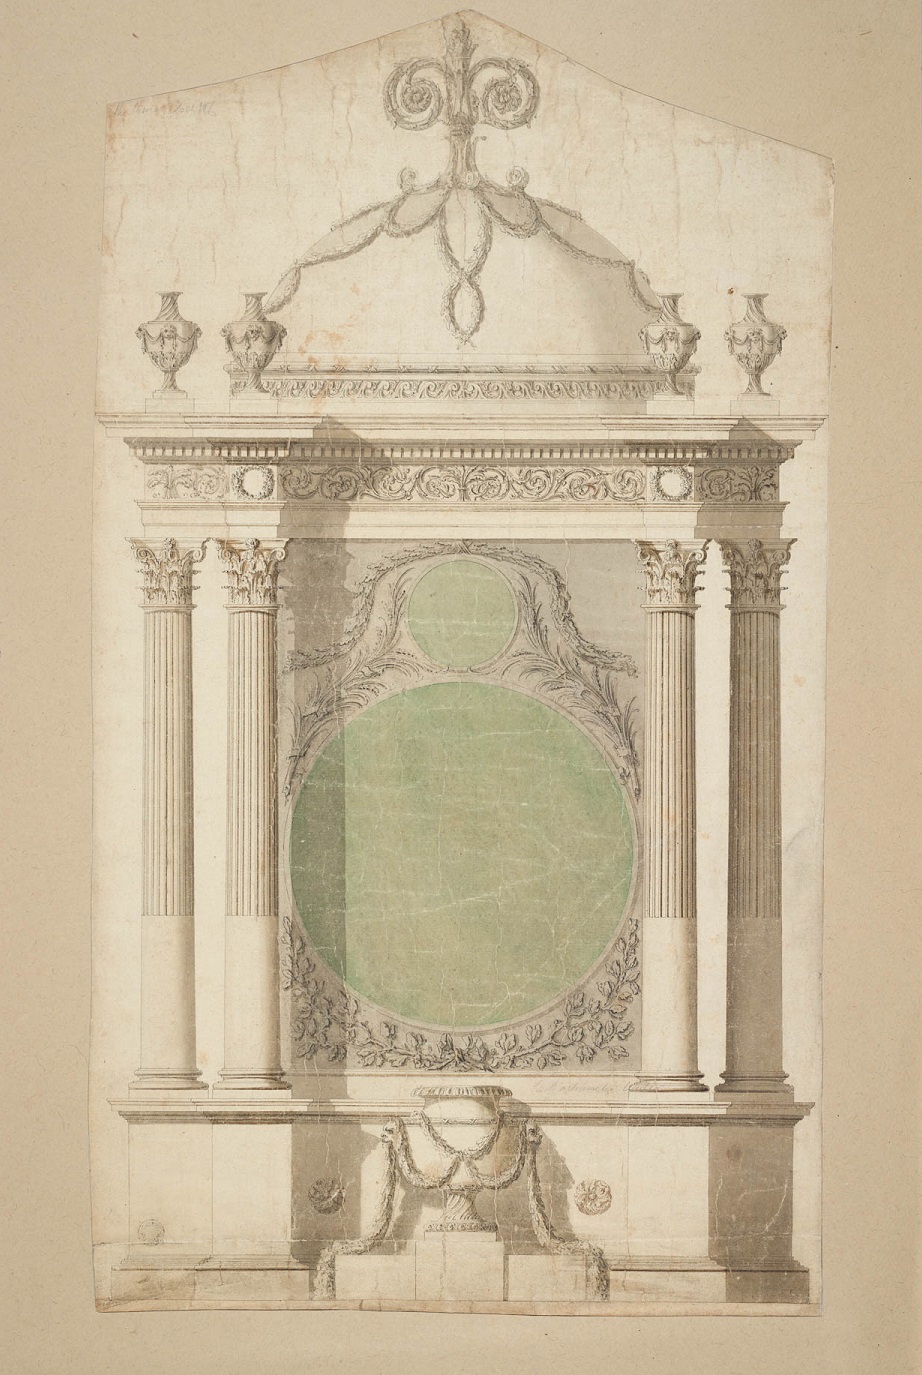 Design for an astronomical clock case for King George III